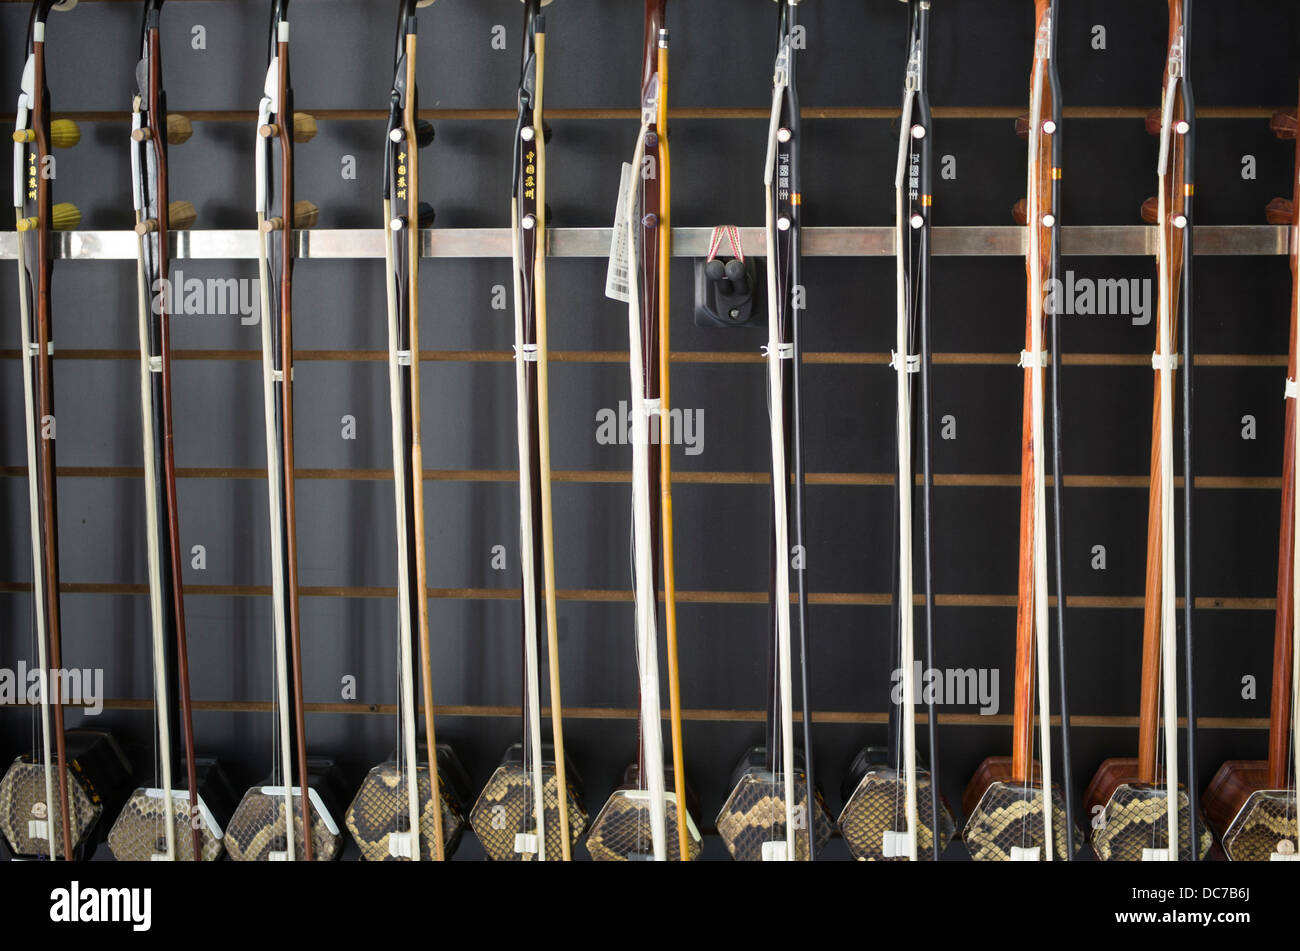 Erhu Instruments on sale in a music shop in Shanghai China. Stock Photo